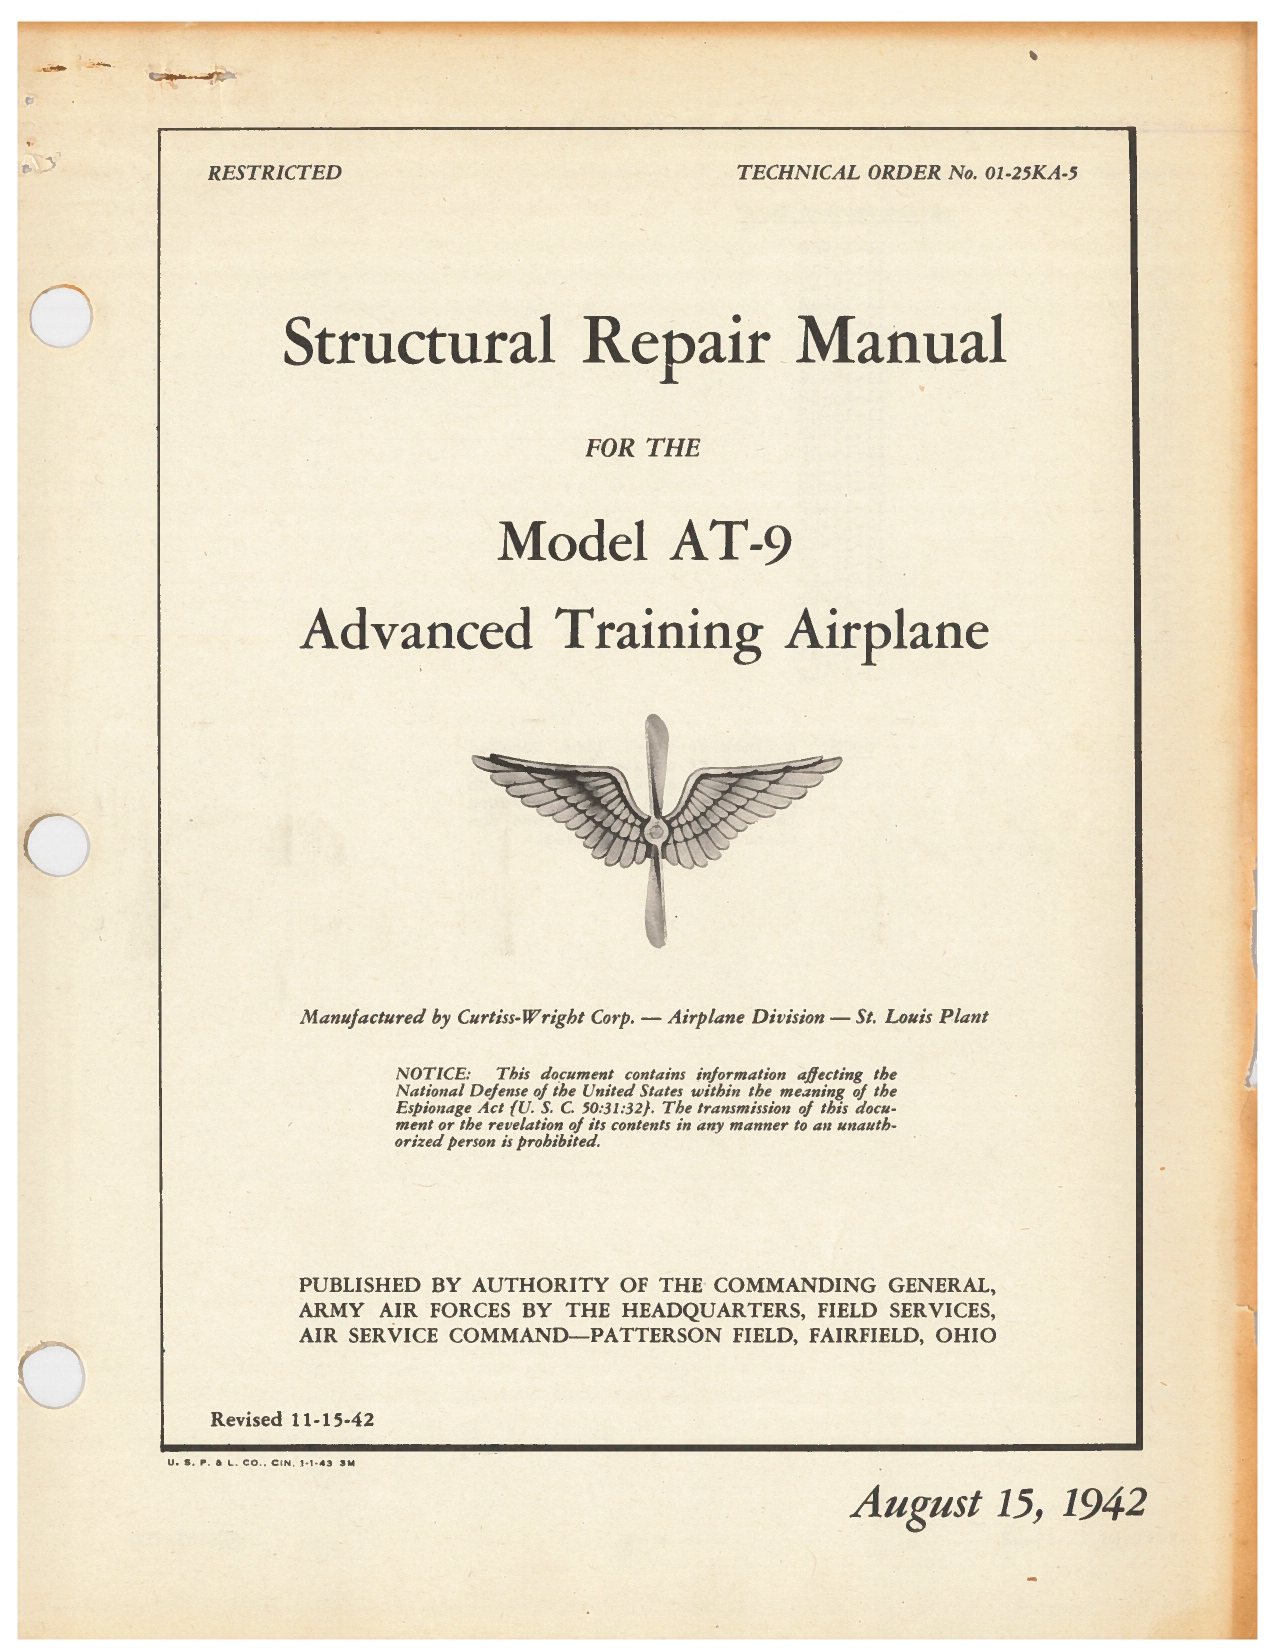 Sample page 1 from AirCorps Library document: Structural Repair Manual for the AT-9 Advanced Training Airplane